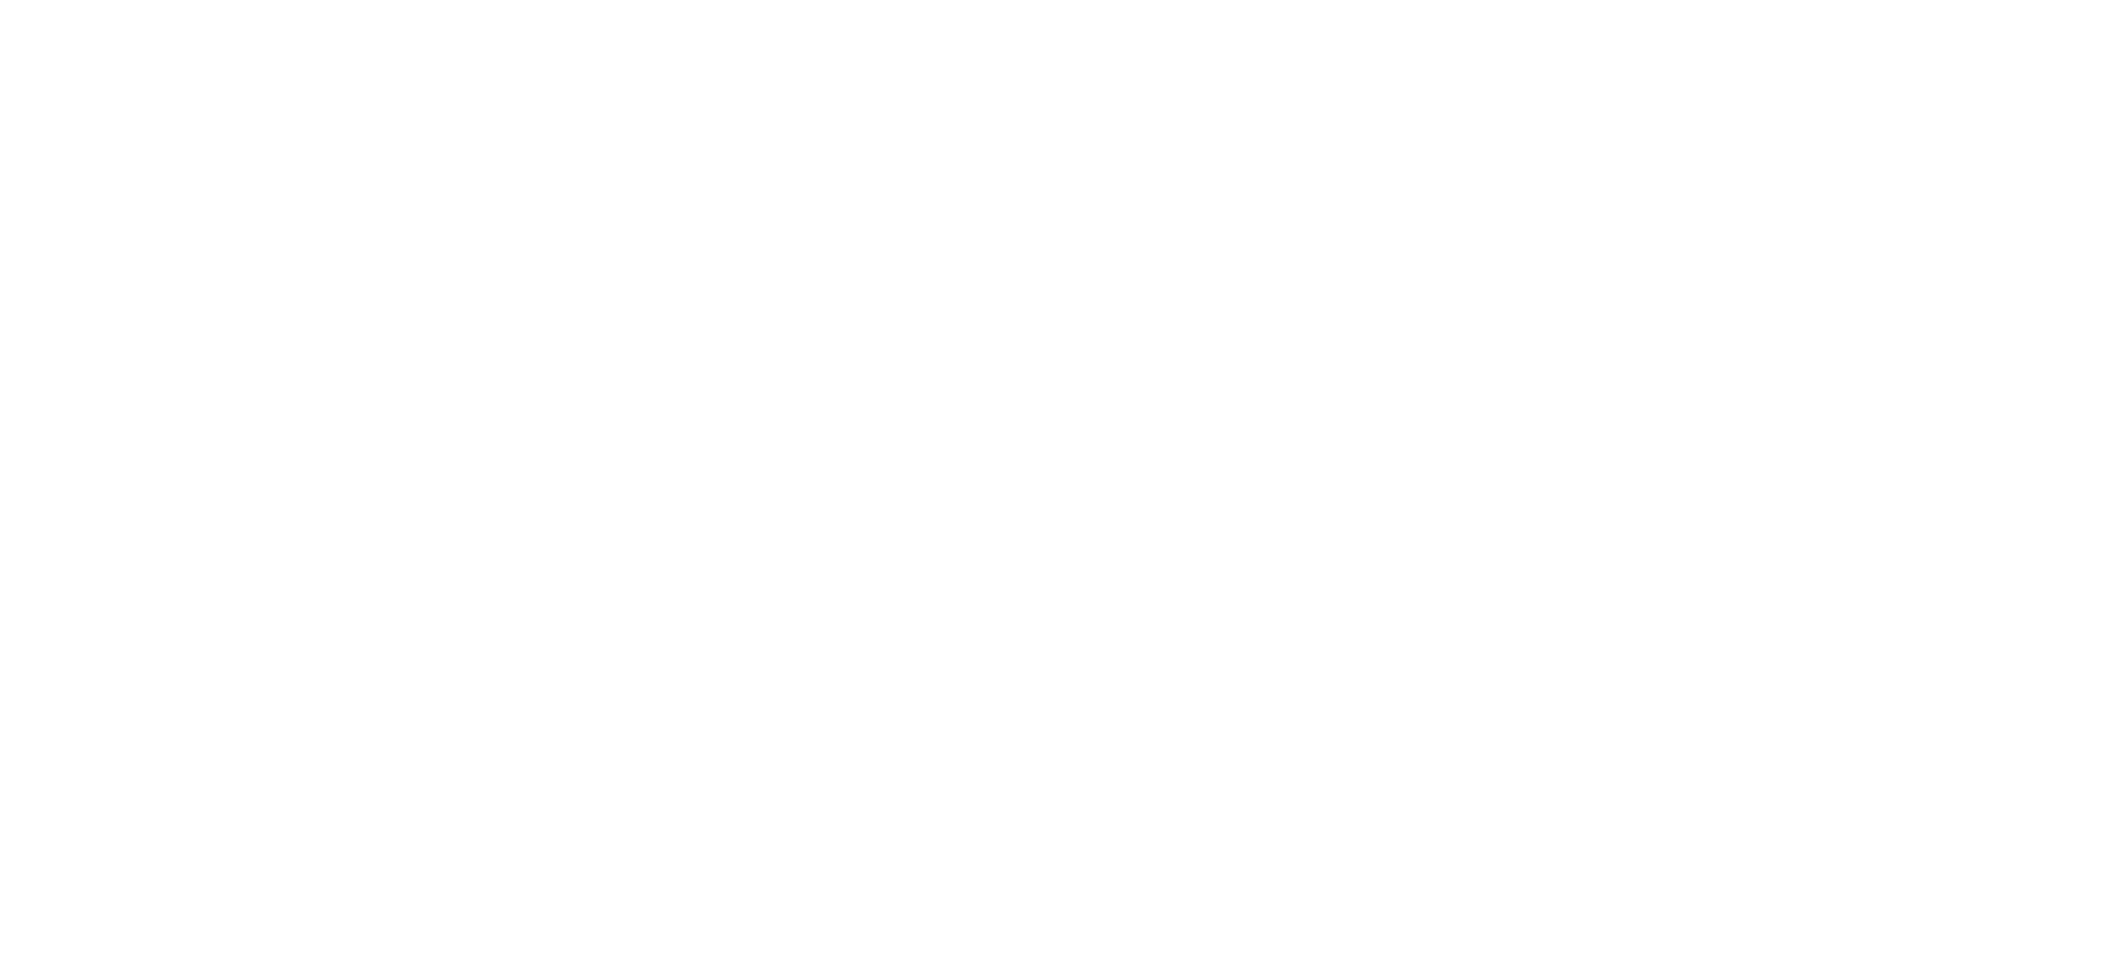 Pager House